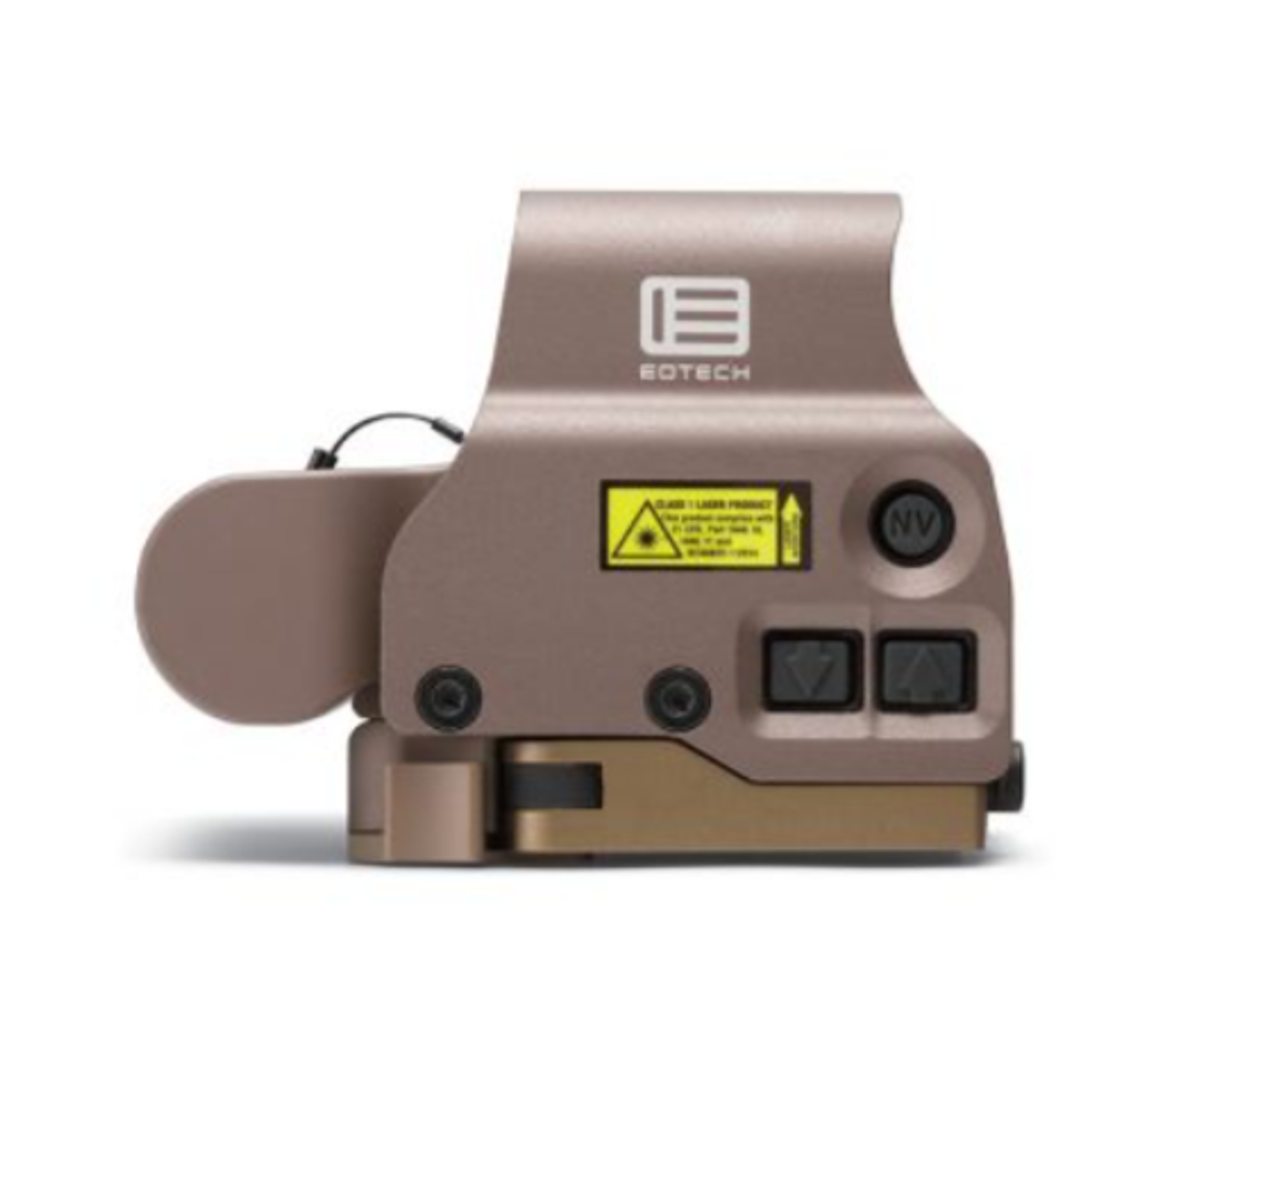 EOTech EXPS3-2TAN NIGHT VISION Compatible Holographic Weapon Sight